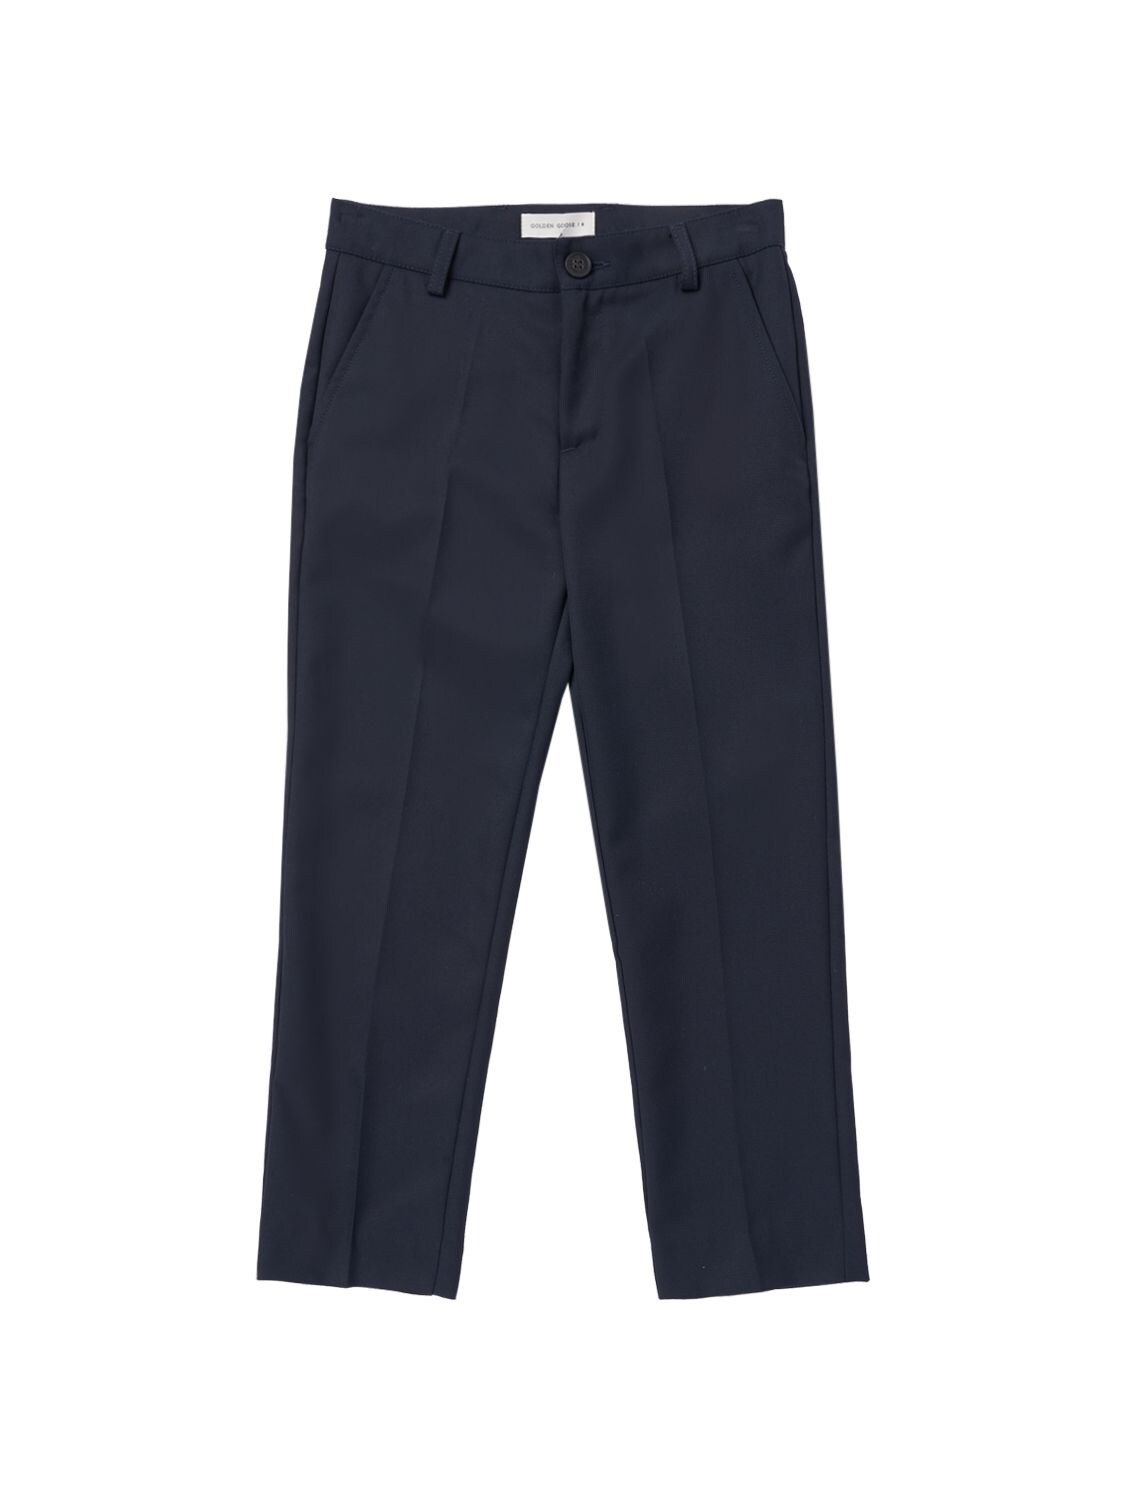 GOLDEN GOOSE STRETCH WOOL TWILL CHINO trousers